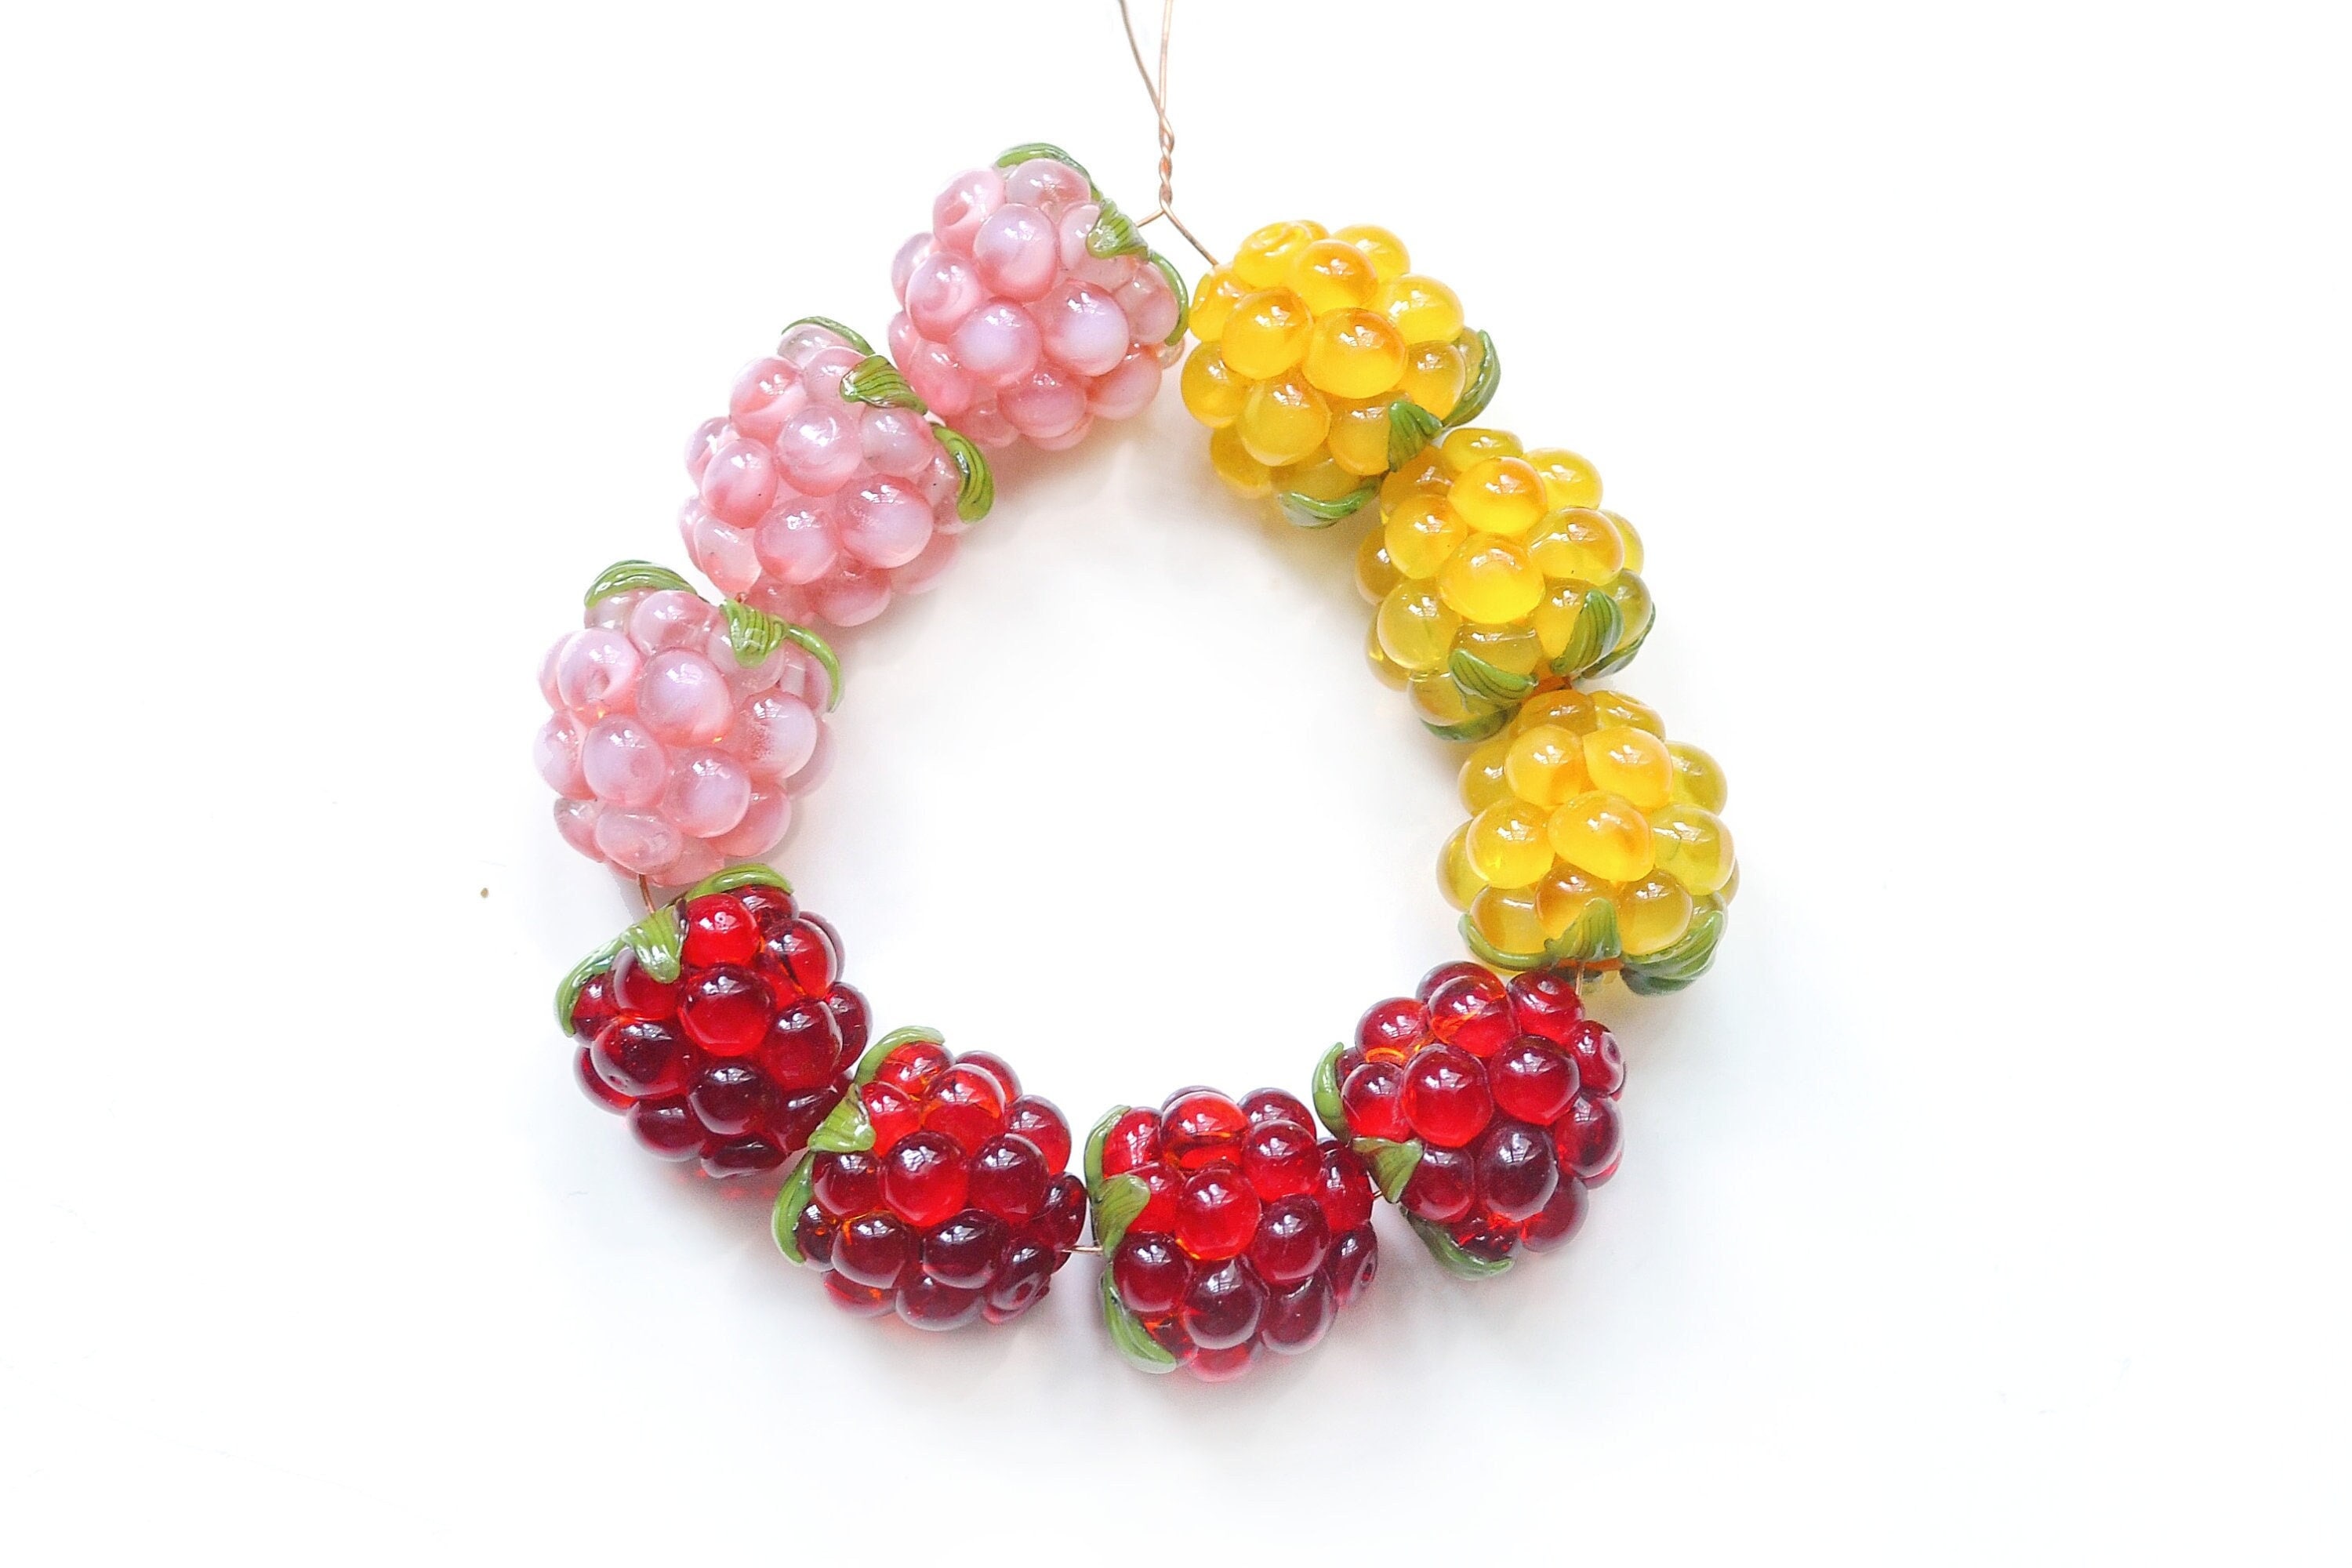  DanLingJewelry 10pcs Red Strawberry Beads Handmade Lampwork  Beads Cute Fruit Spacer Beads for DIY Earring Necklace Jewelry Supplies :  Arts, Crafts & Sewing